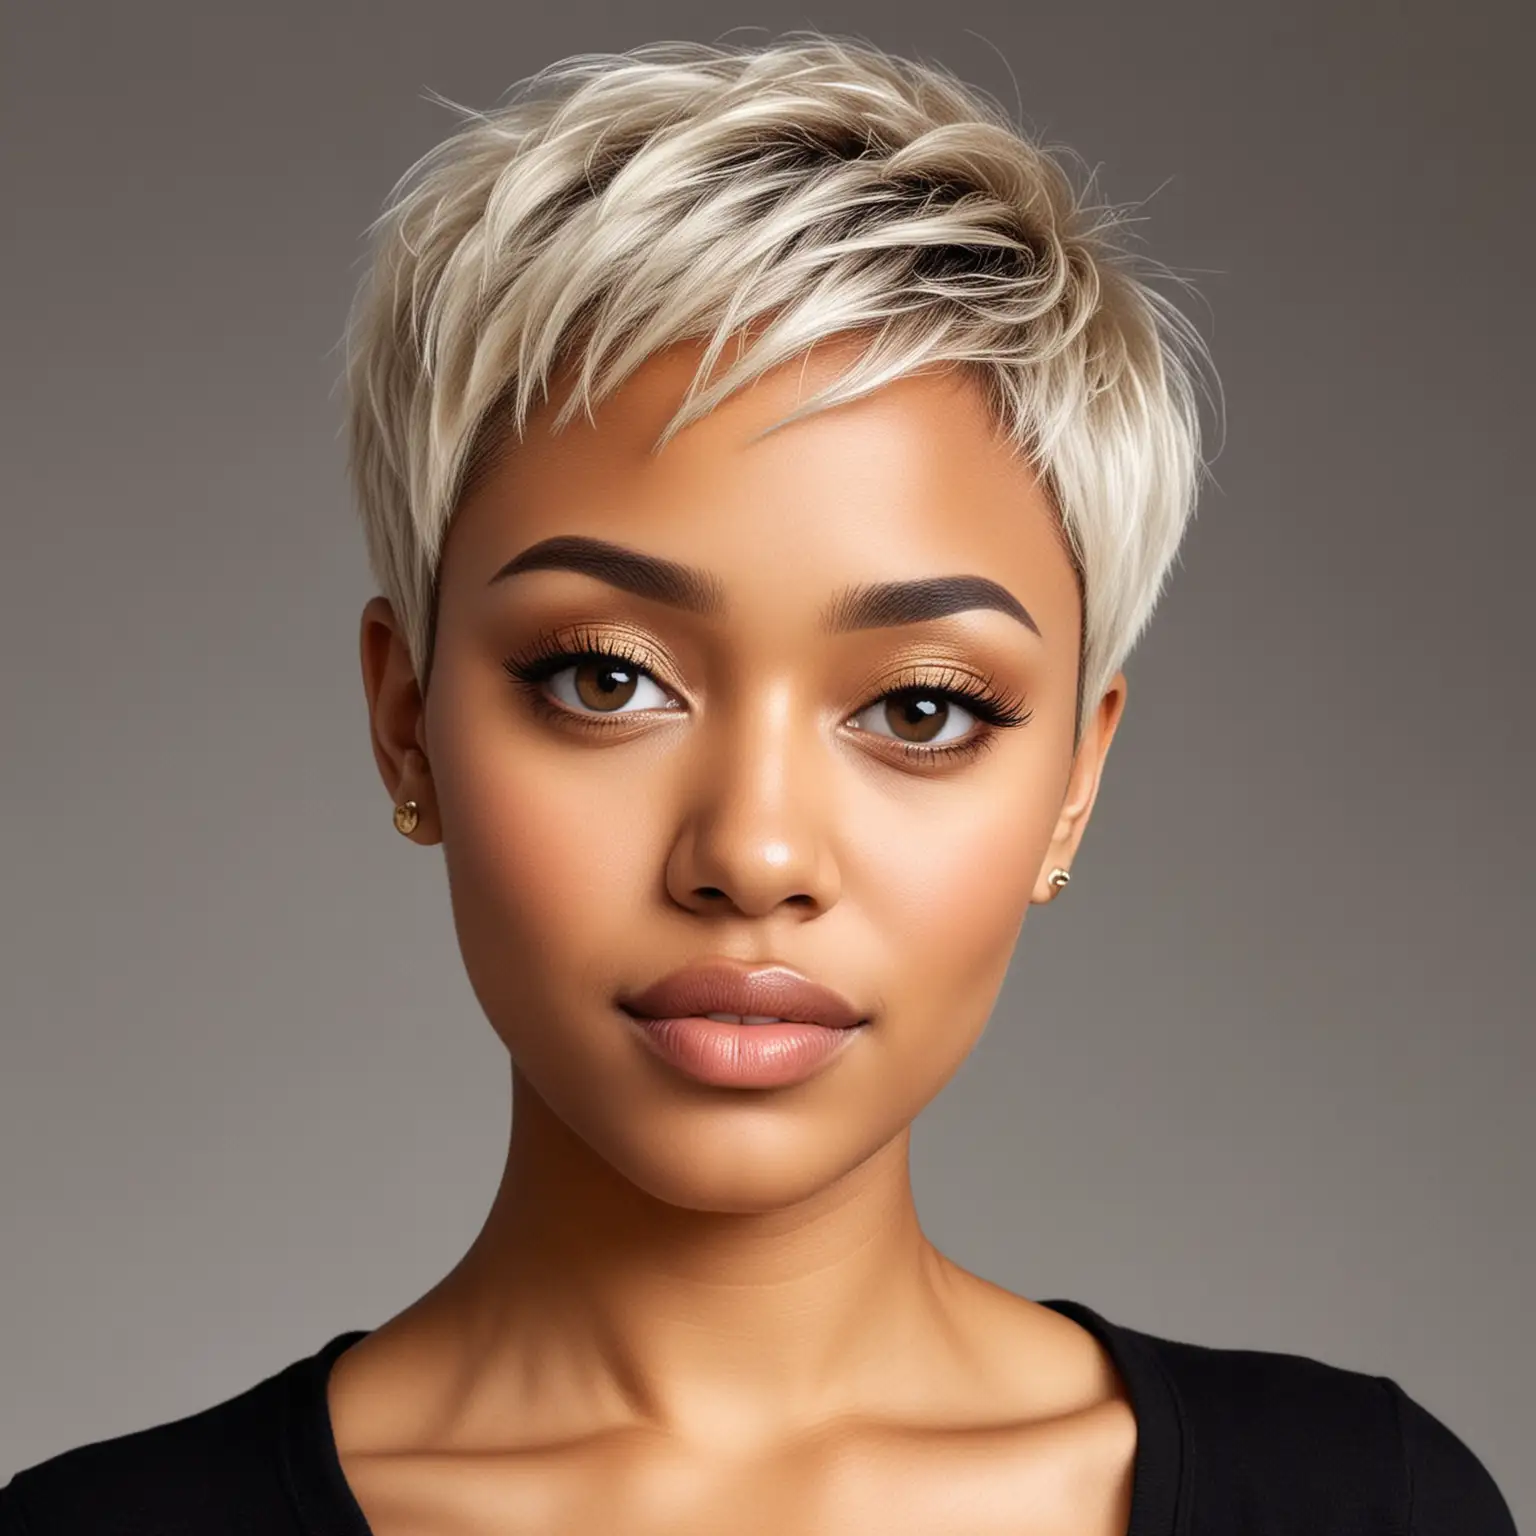 create full body image of light skin black lady with downturned gray eyes, honey blonde hair in pixie cut



